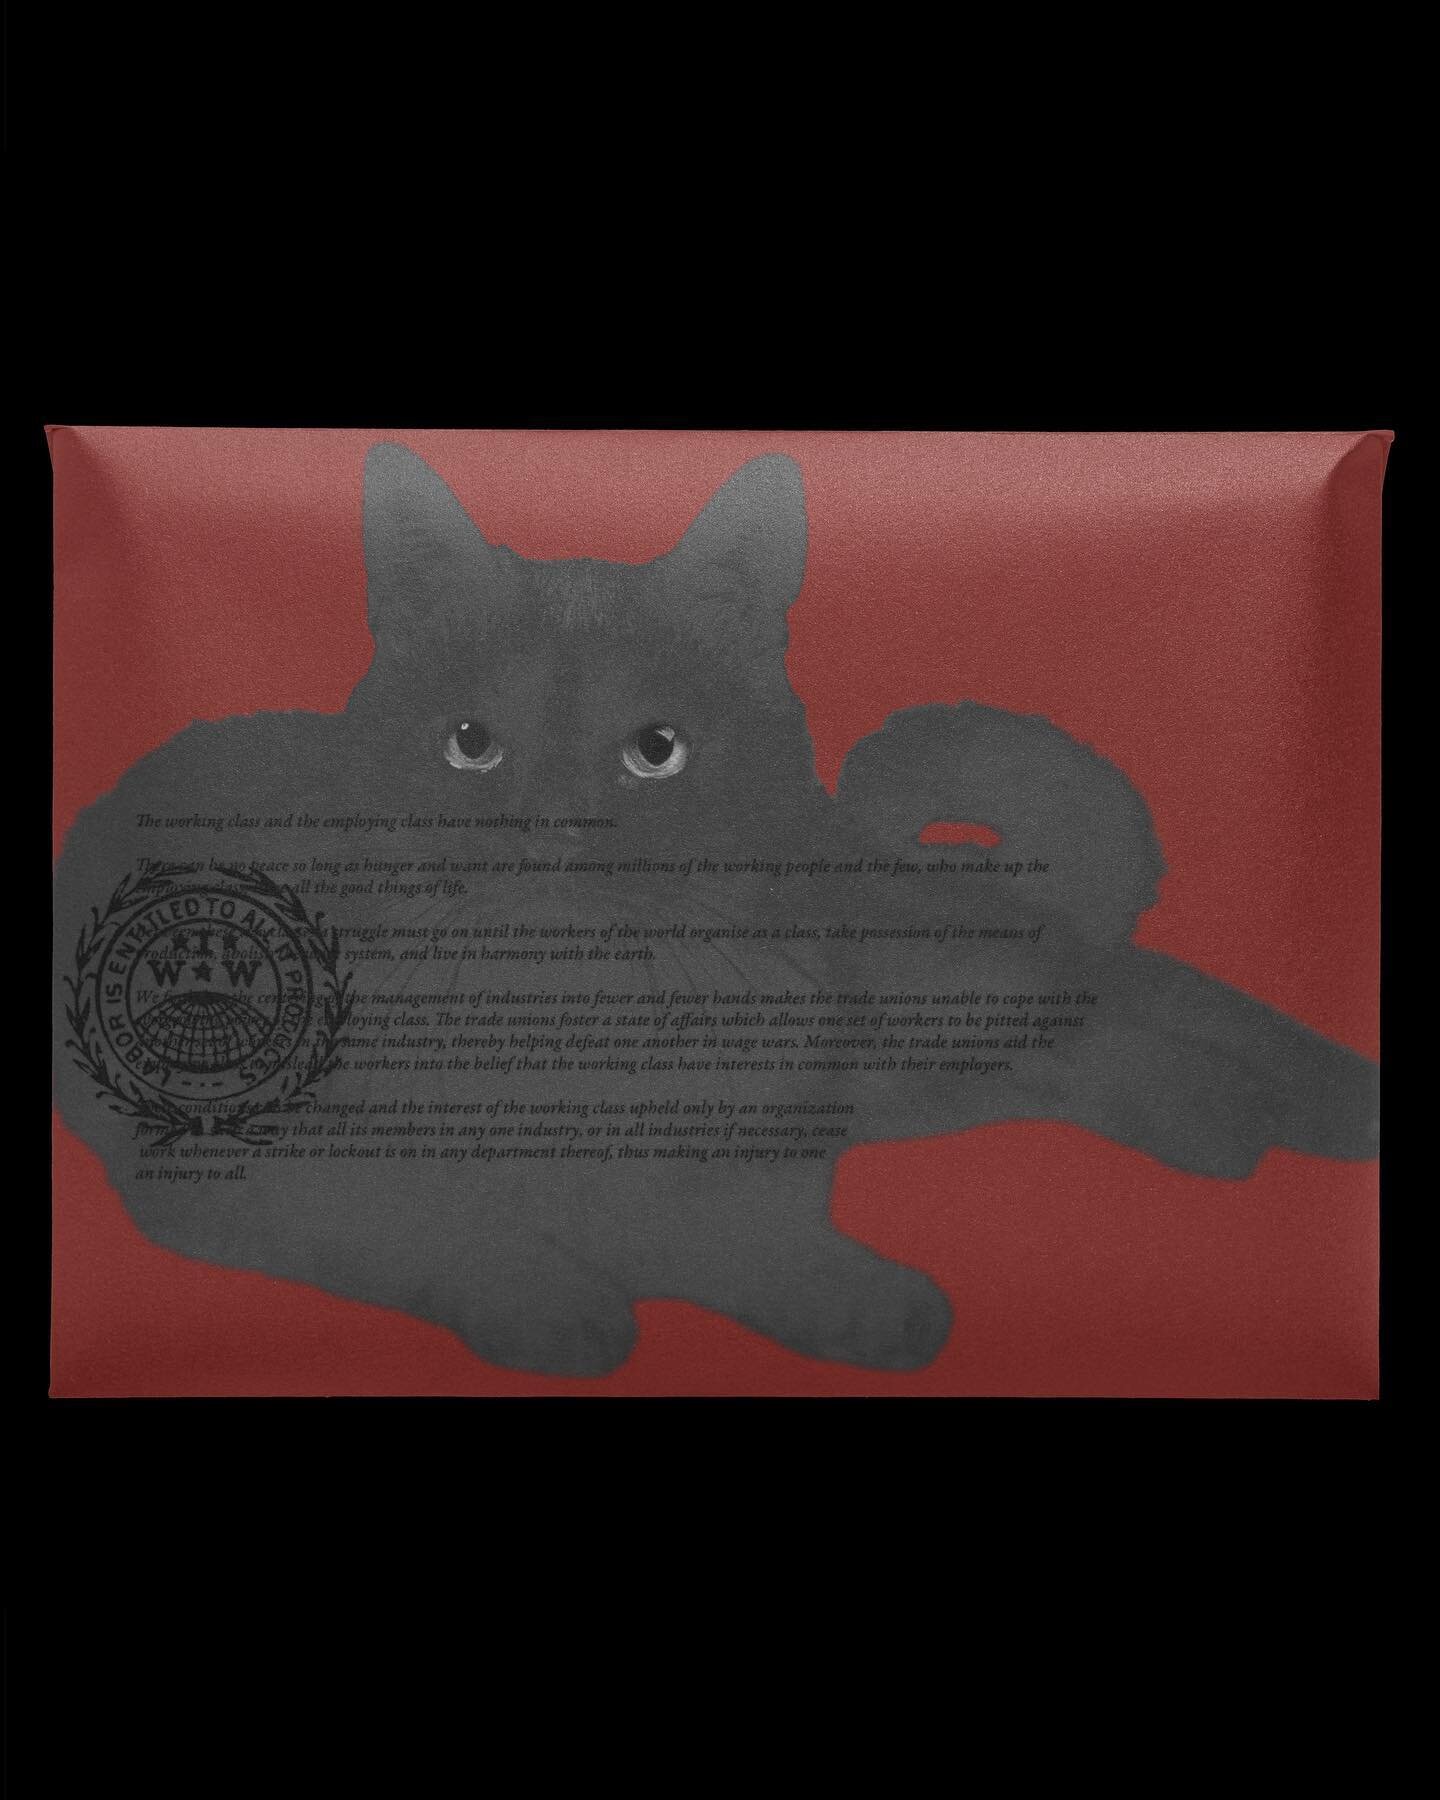 ℒ𝒶𝒷𝑜𝓇 𝒟𝒶𝓎 &laquo;𝒜𝓂𝑒𝓇𝒾𝒸𝒶𝓃 𝓂𝒶𝓎𝒹𝒶𝓎&raquo; 
&bull;
&bull;
&bull;
[black background with horizontal mail package/magazine cover in burgundy with a black cat (grey)  set to fit most of the area: text in front of the cat is the preambl